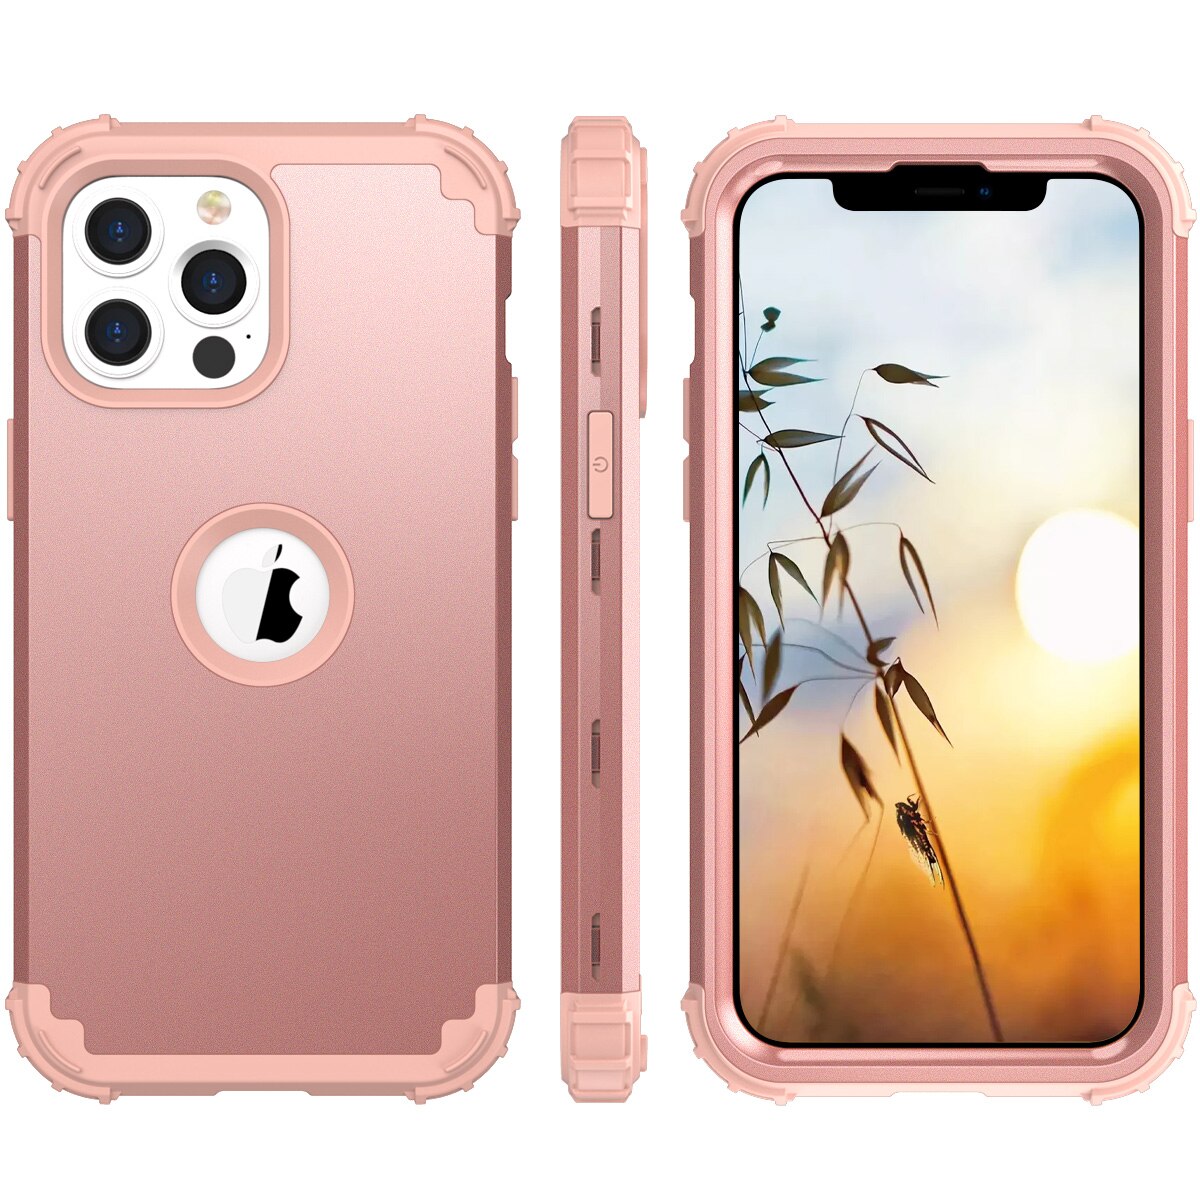 iPhone 13 Pro Case, 3-in-1 Hybrid Soft Silicone Rubber Hard PC Heavy Duty Shockproof Rugged Anti-Slip Bumper Protective Case - 380230 for iPhone 13 / Rose Gold / United States Find Epic Store